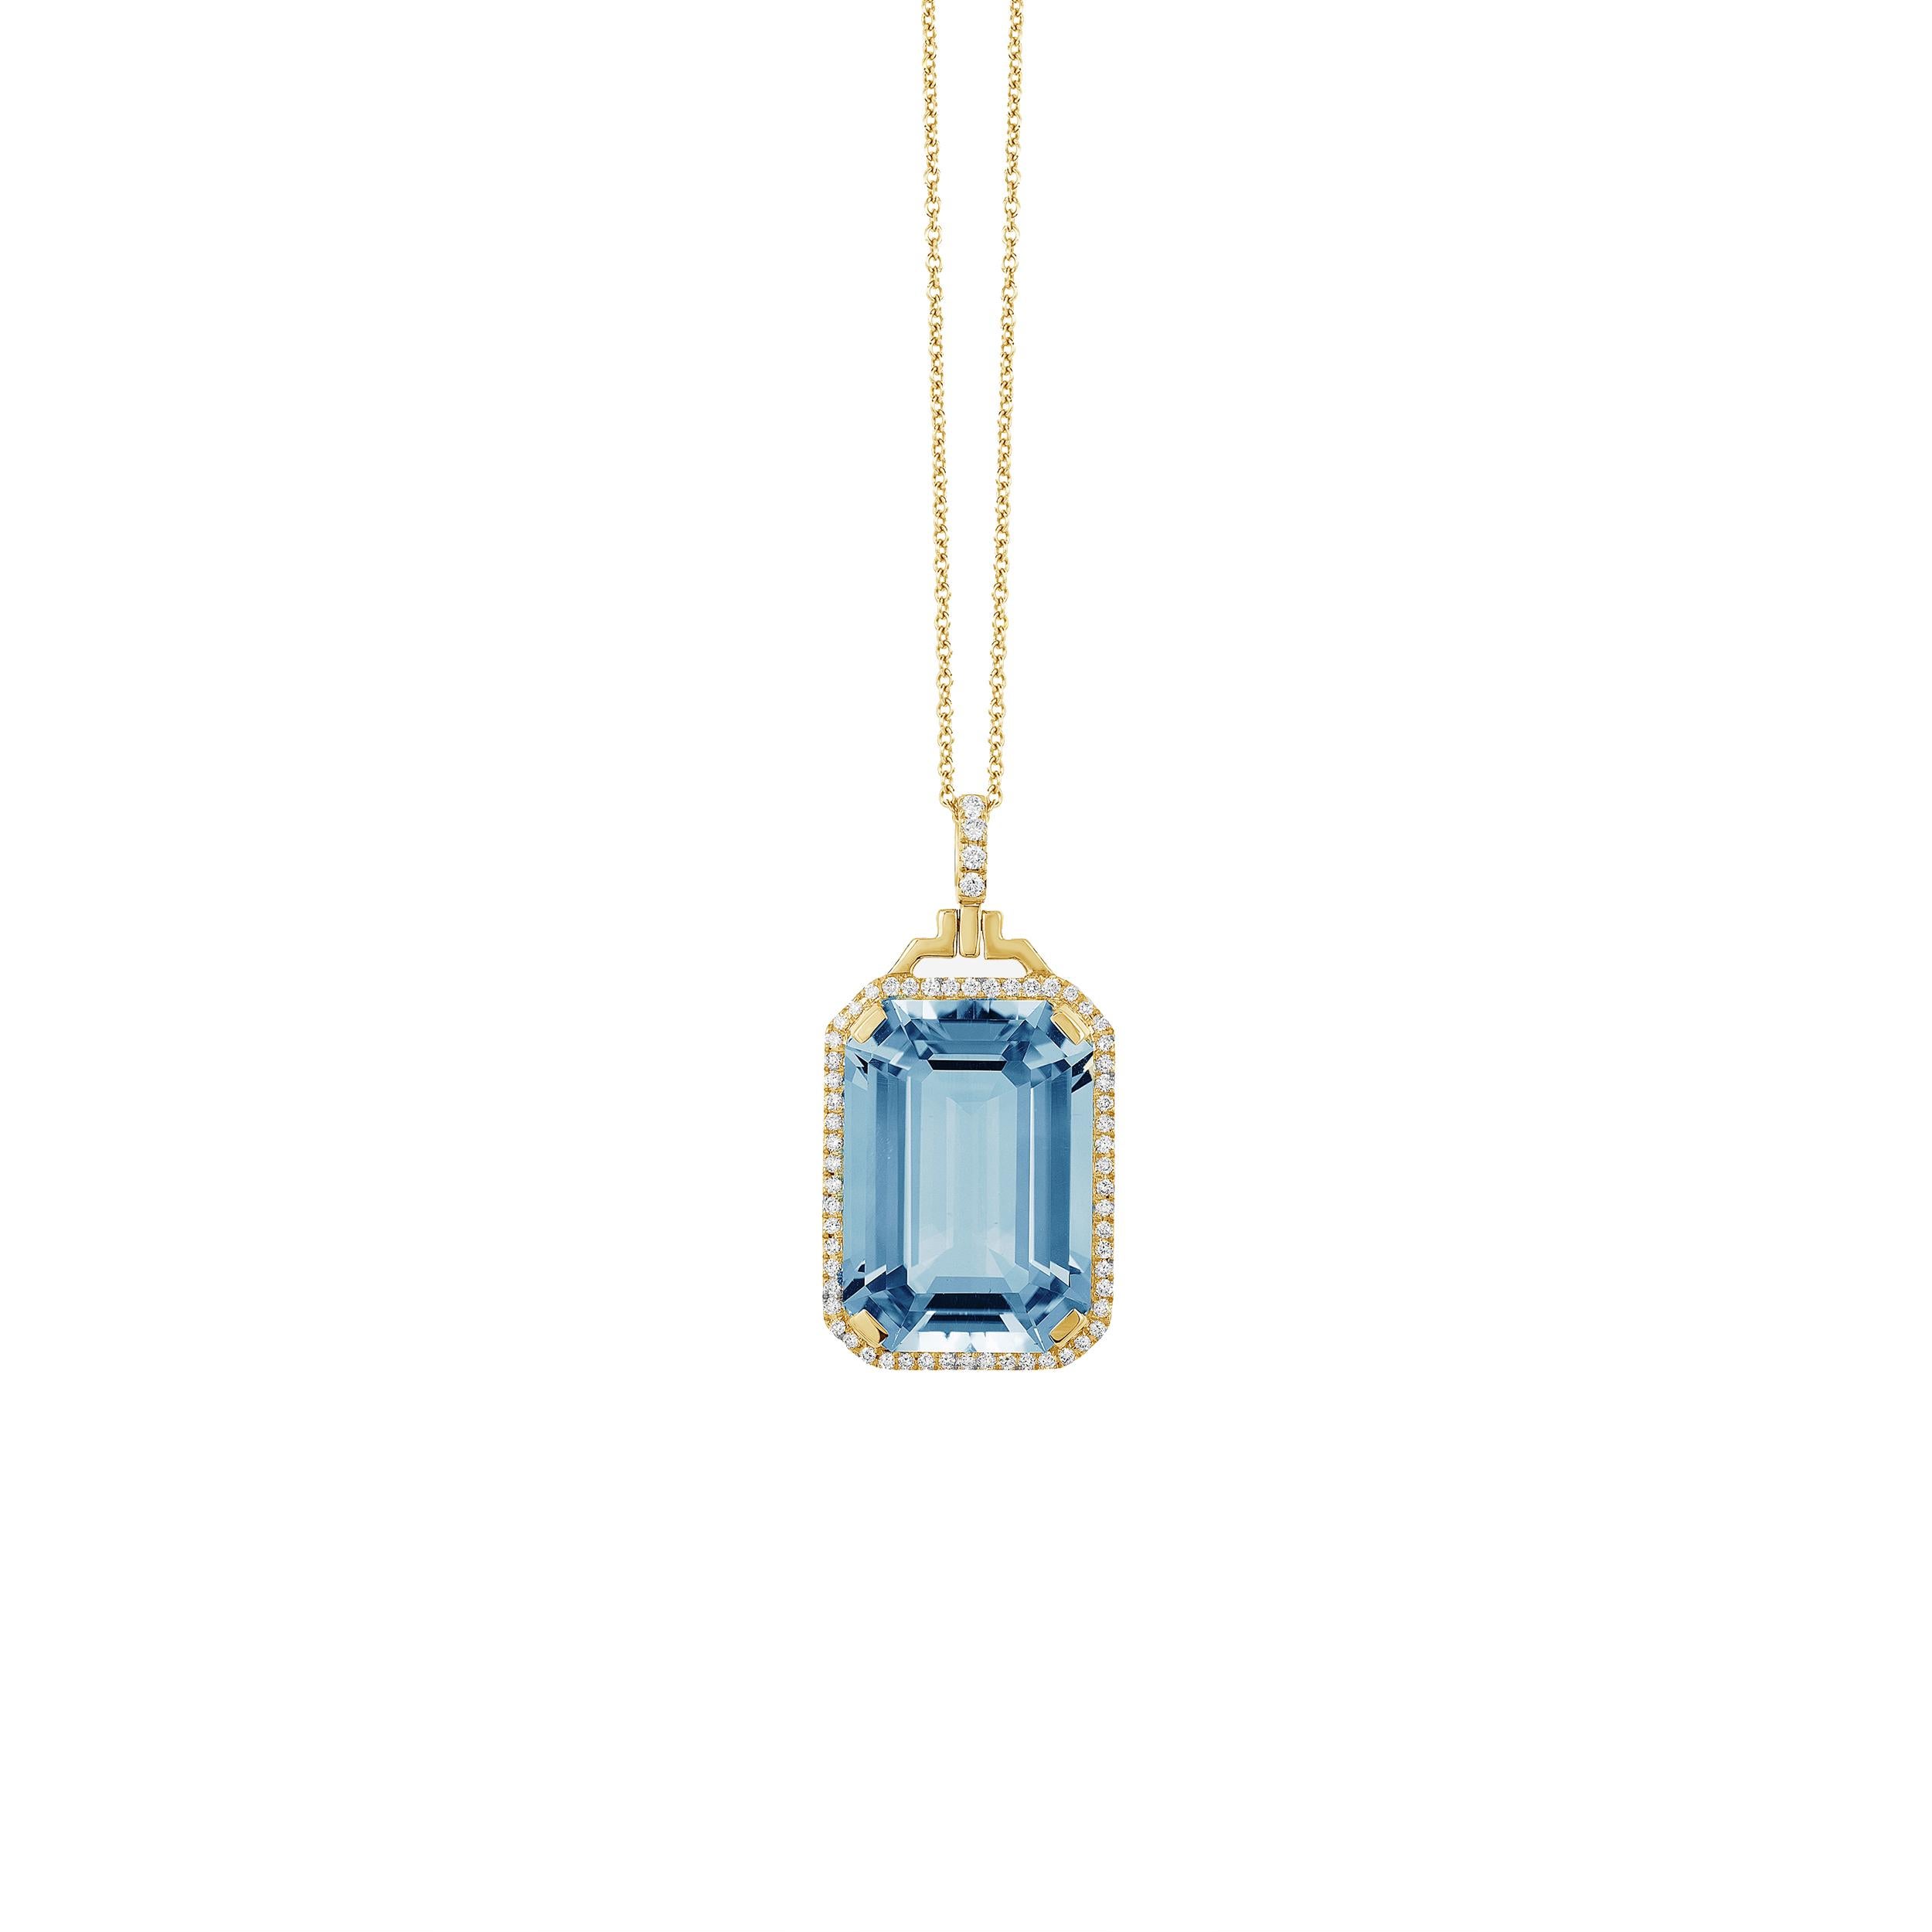 Blue Topaz Emerald Cut Pendant with Diamonds in 18K Yellow Gold, from 'Gossip' Collection on a 18'' Chain
 
 Stone Size: 14 x 20 mm 
 
 Gemstone Approx Wt: Blue Topaz- 21.80 Carats 
 
 Diamonds: G-H / VS, Approx Wt : 0.30 Carats